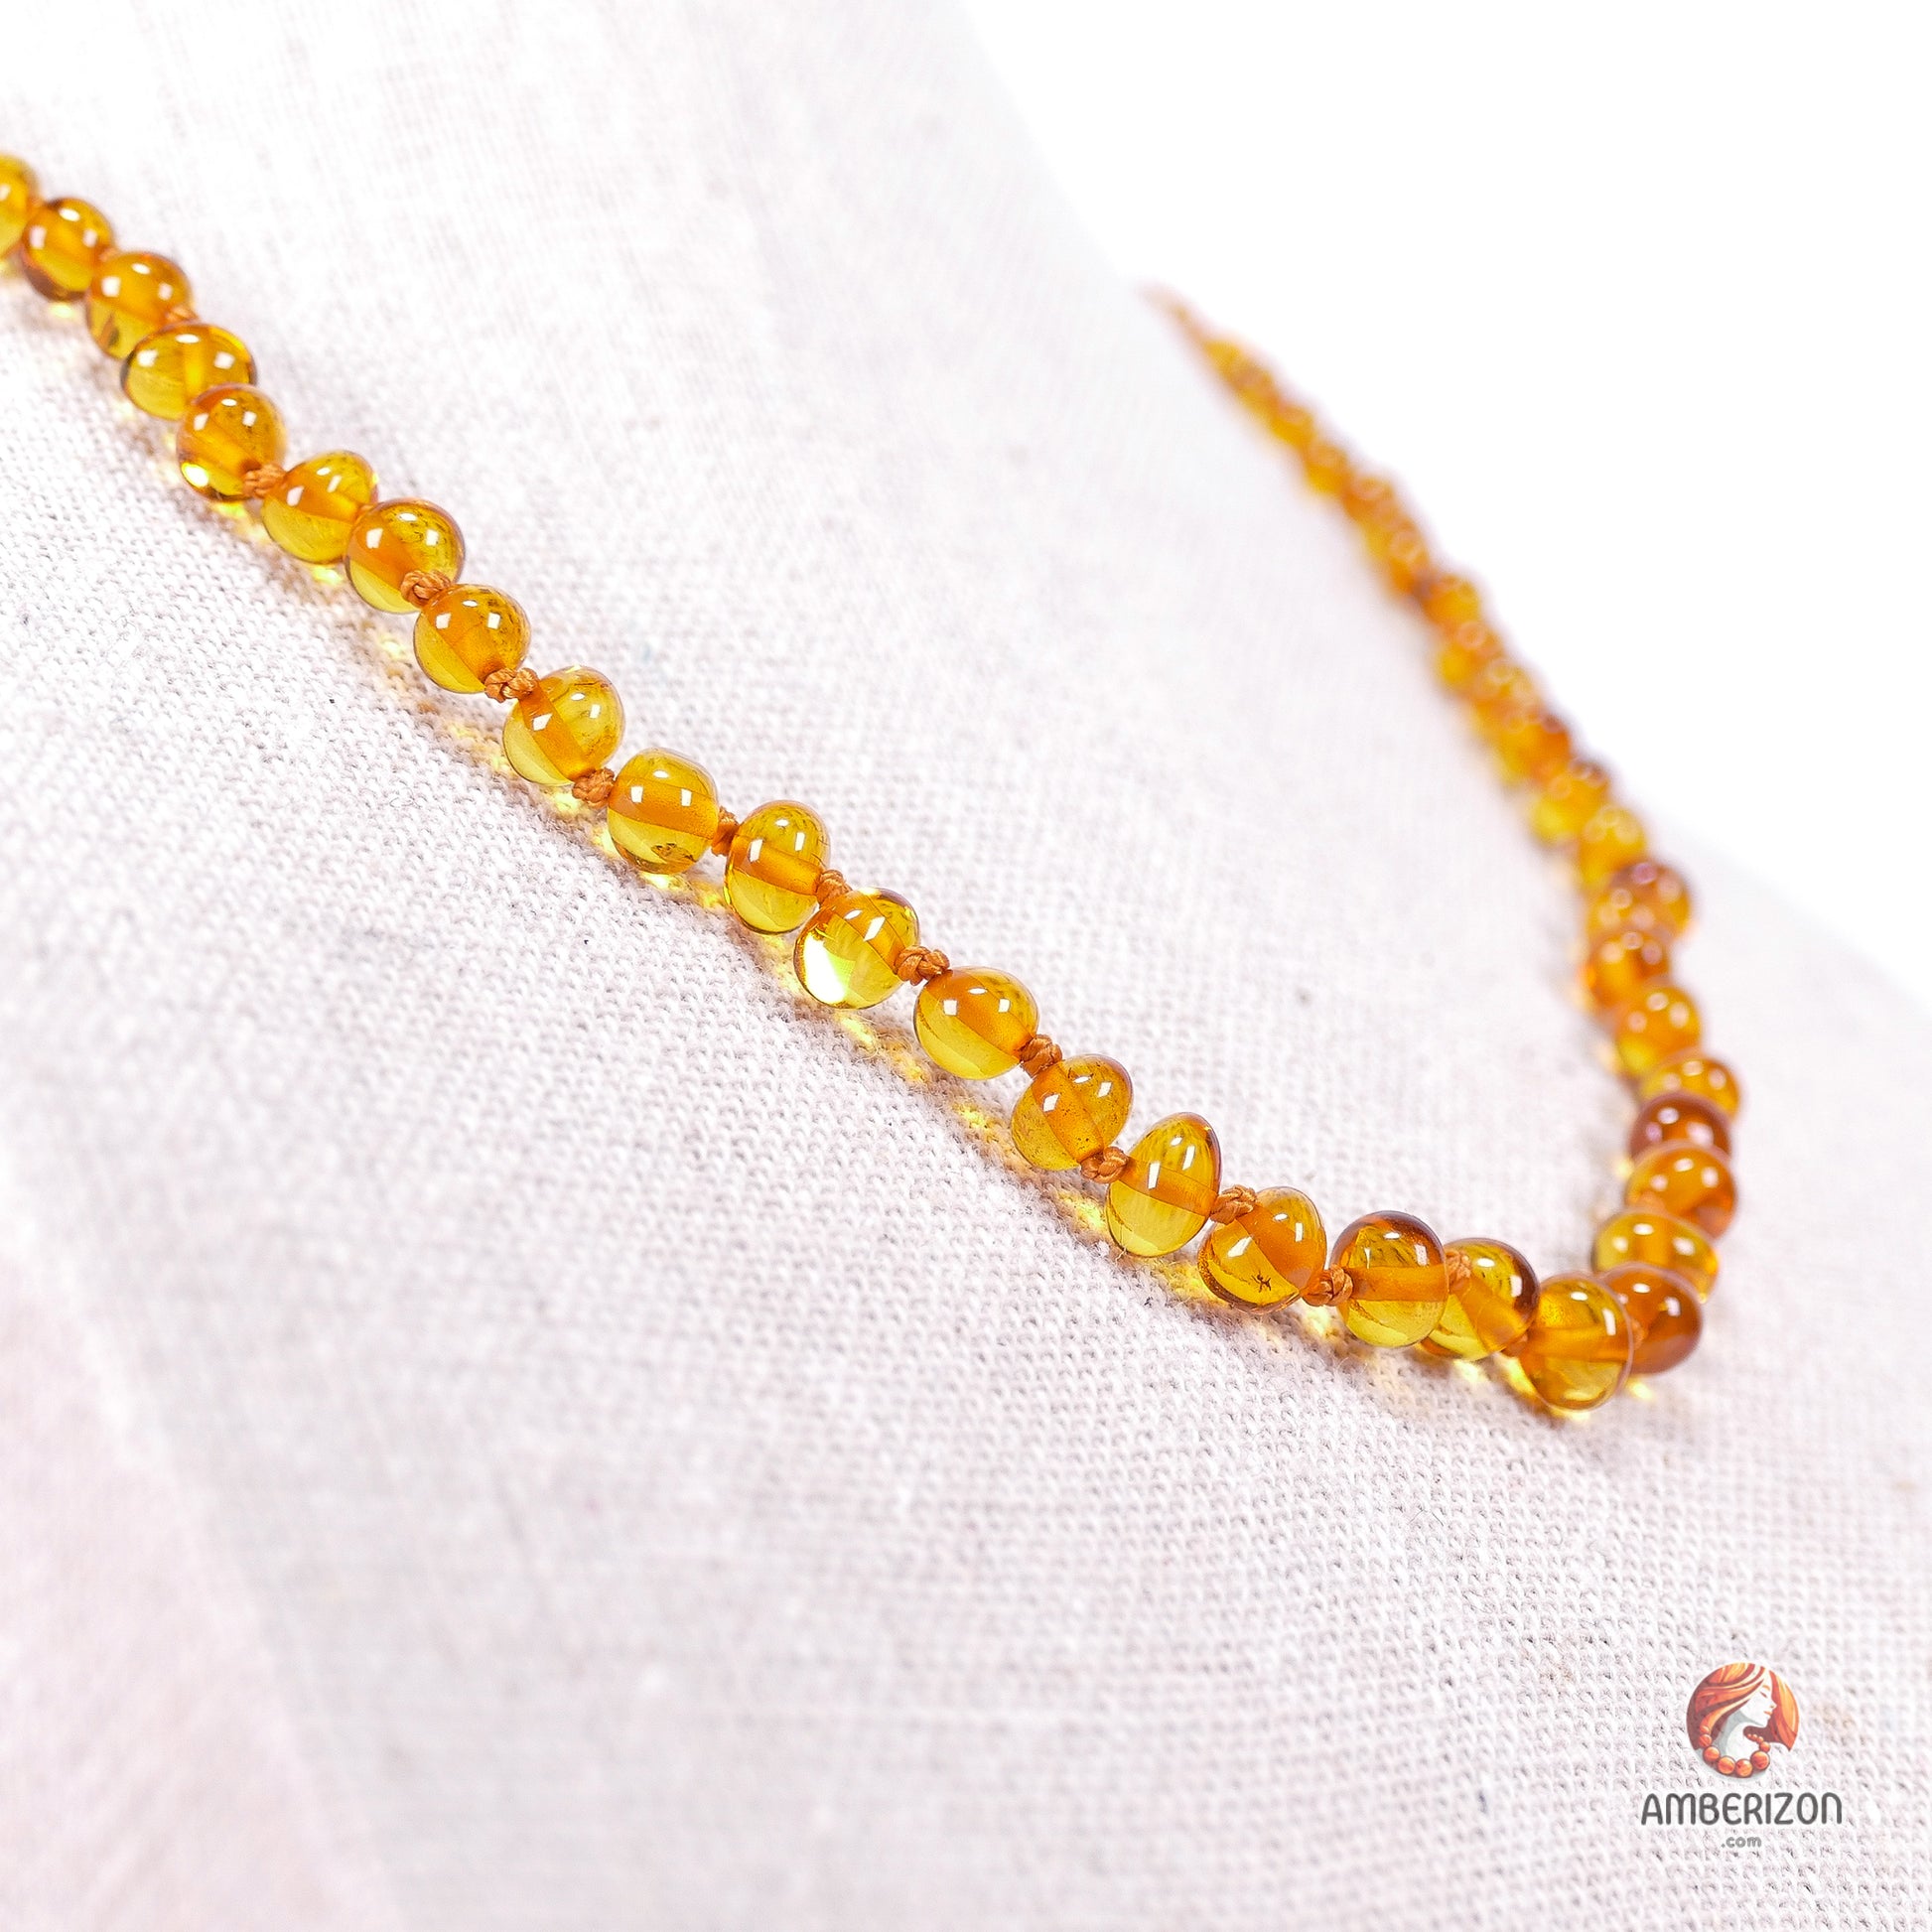 Genuine Unisex Baltic Amber Necklace - Handcrafted - Honey Color